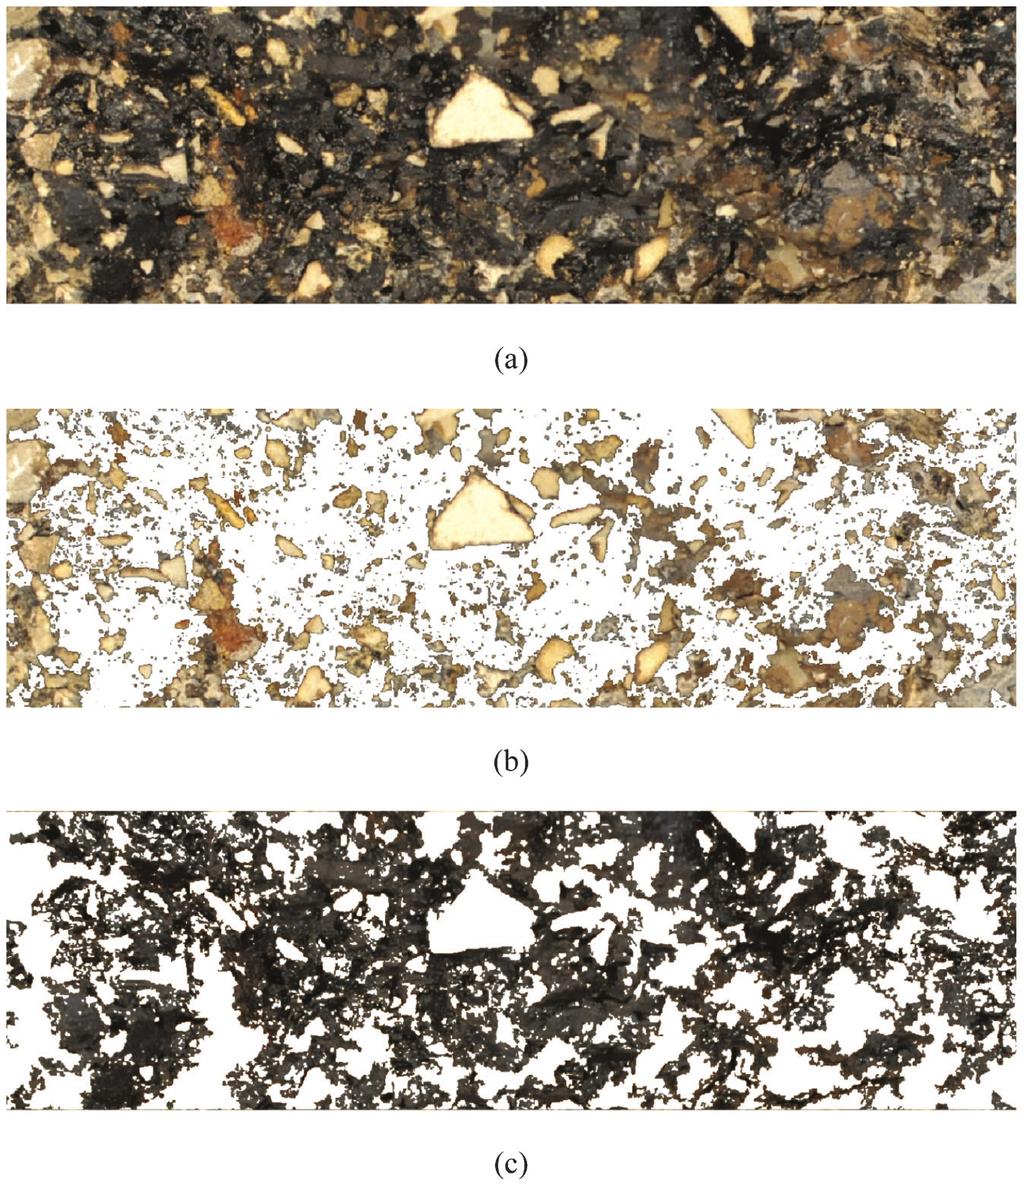 Figure 3.9 Images from DIA process for uncoated aggregate surface area calculation: (a) original image; (b) identified uncoated aggregate image; (c) identified asphalt image.